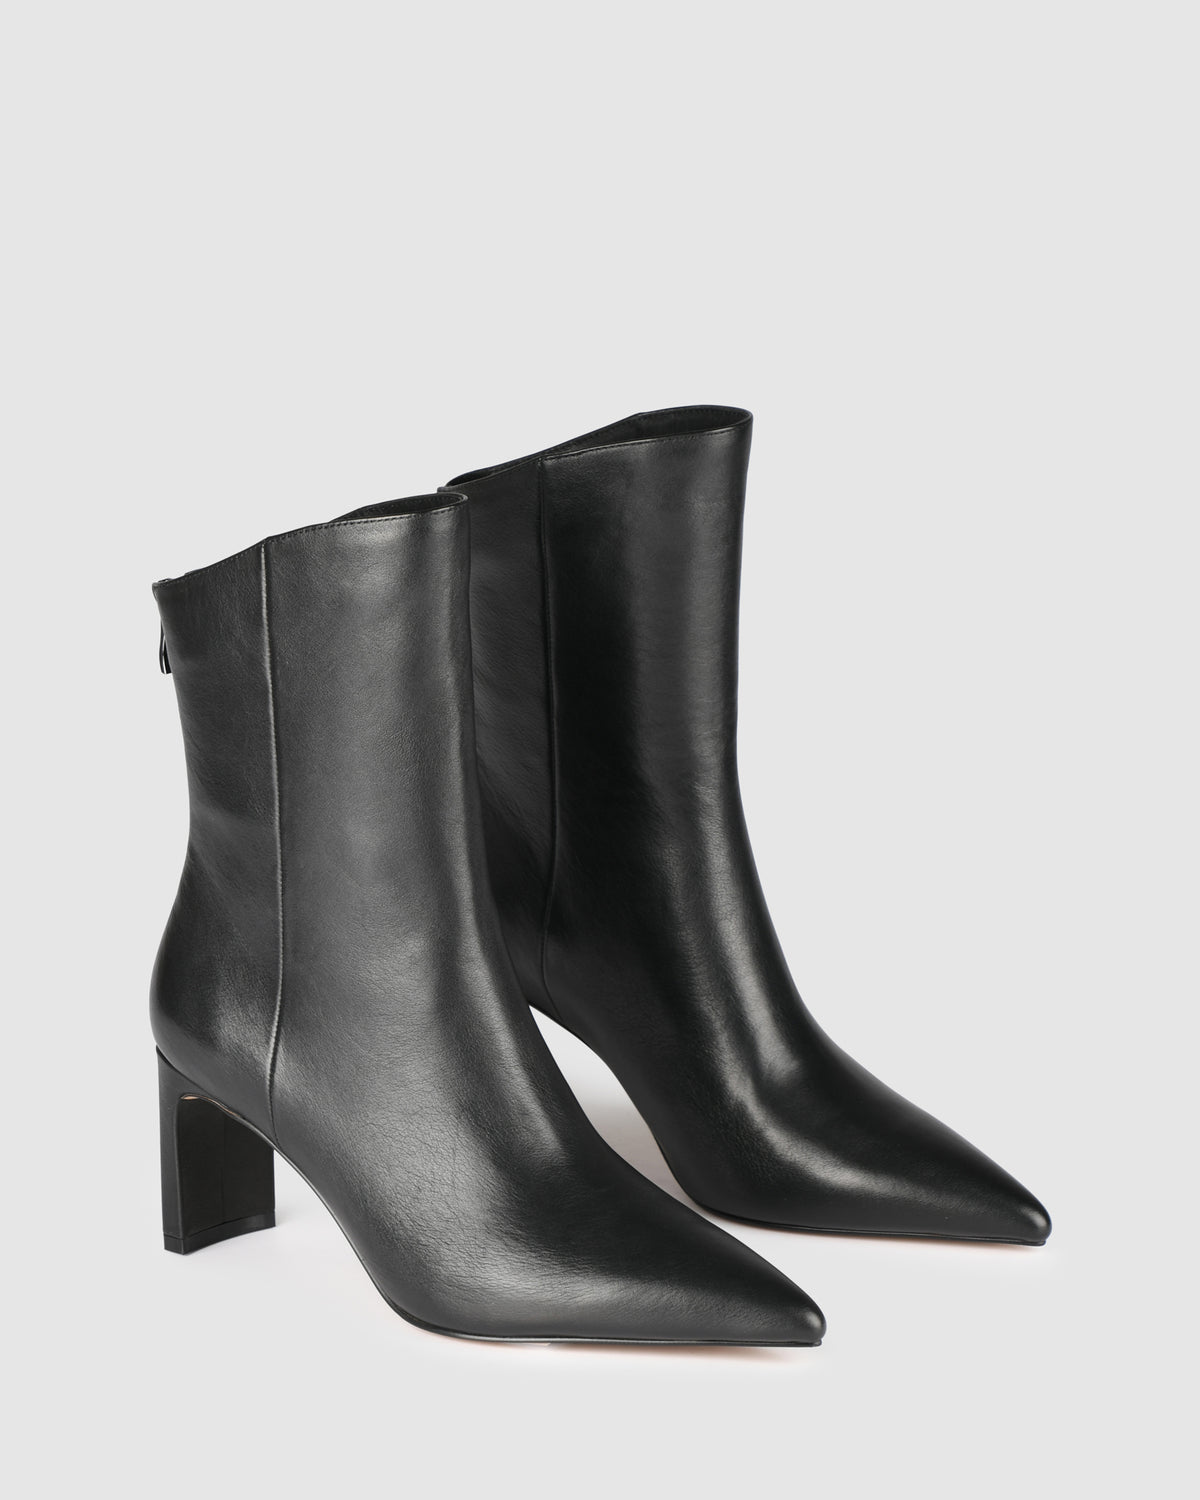 PEPPER CALF BOOTS BLACK LEATHER